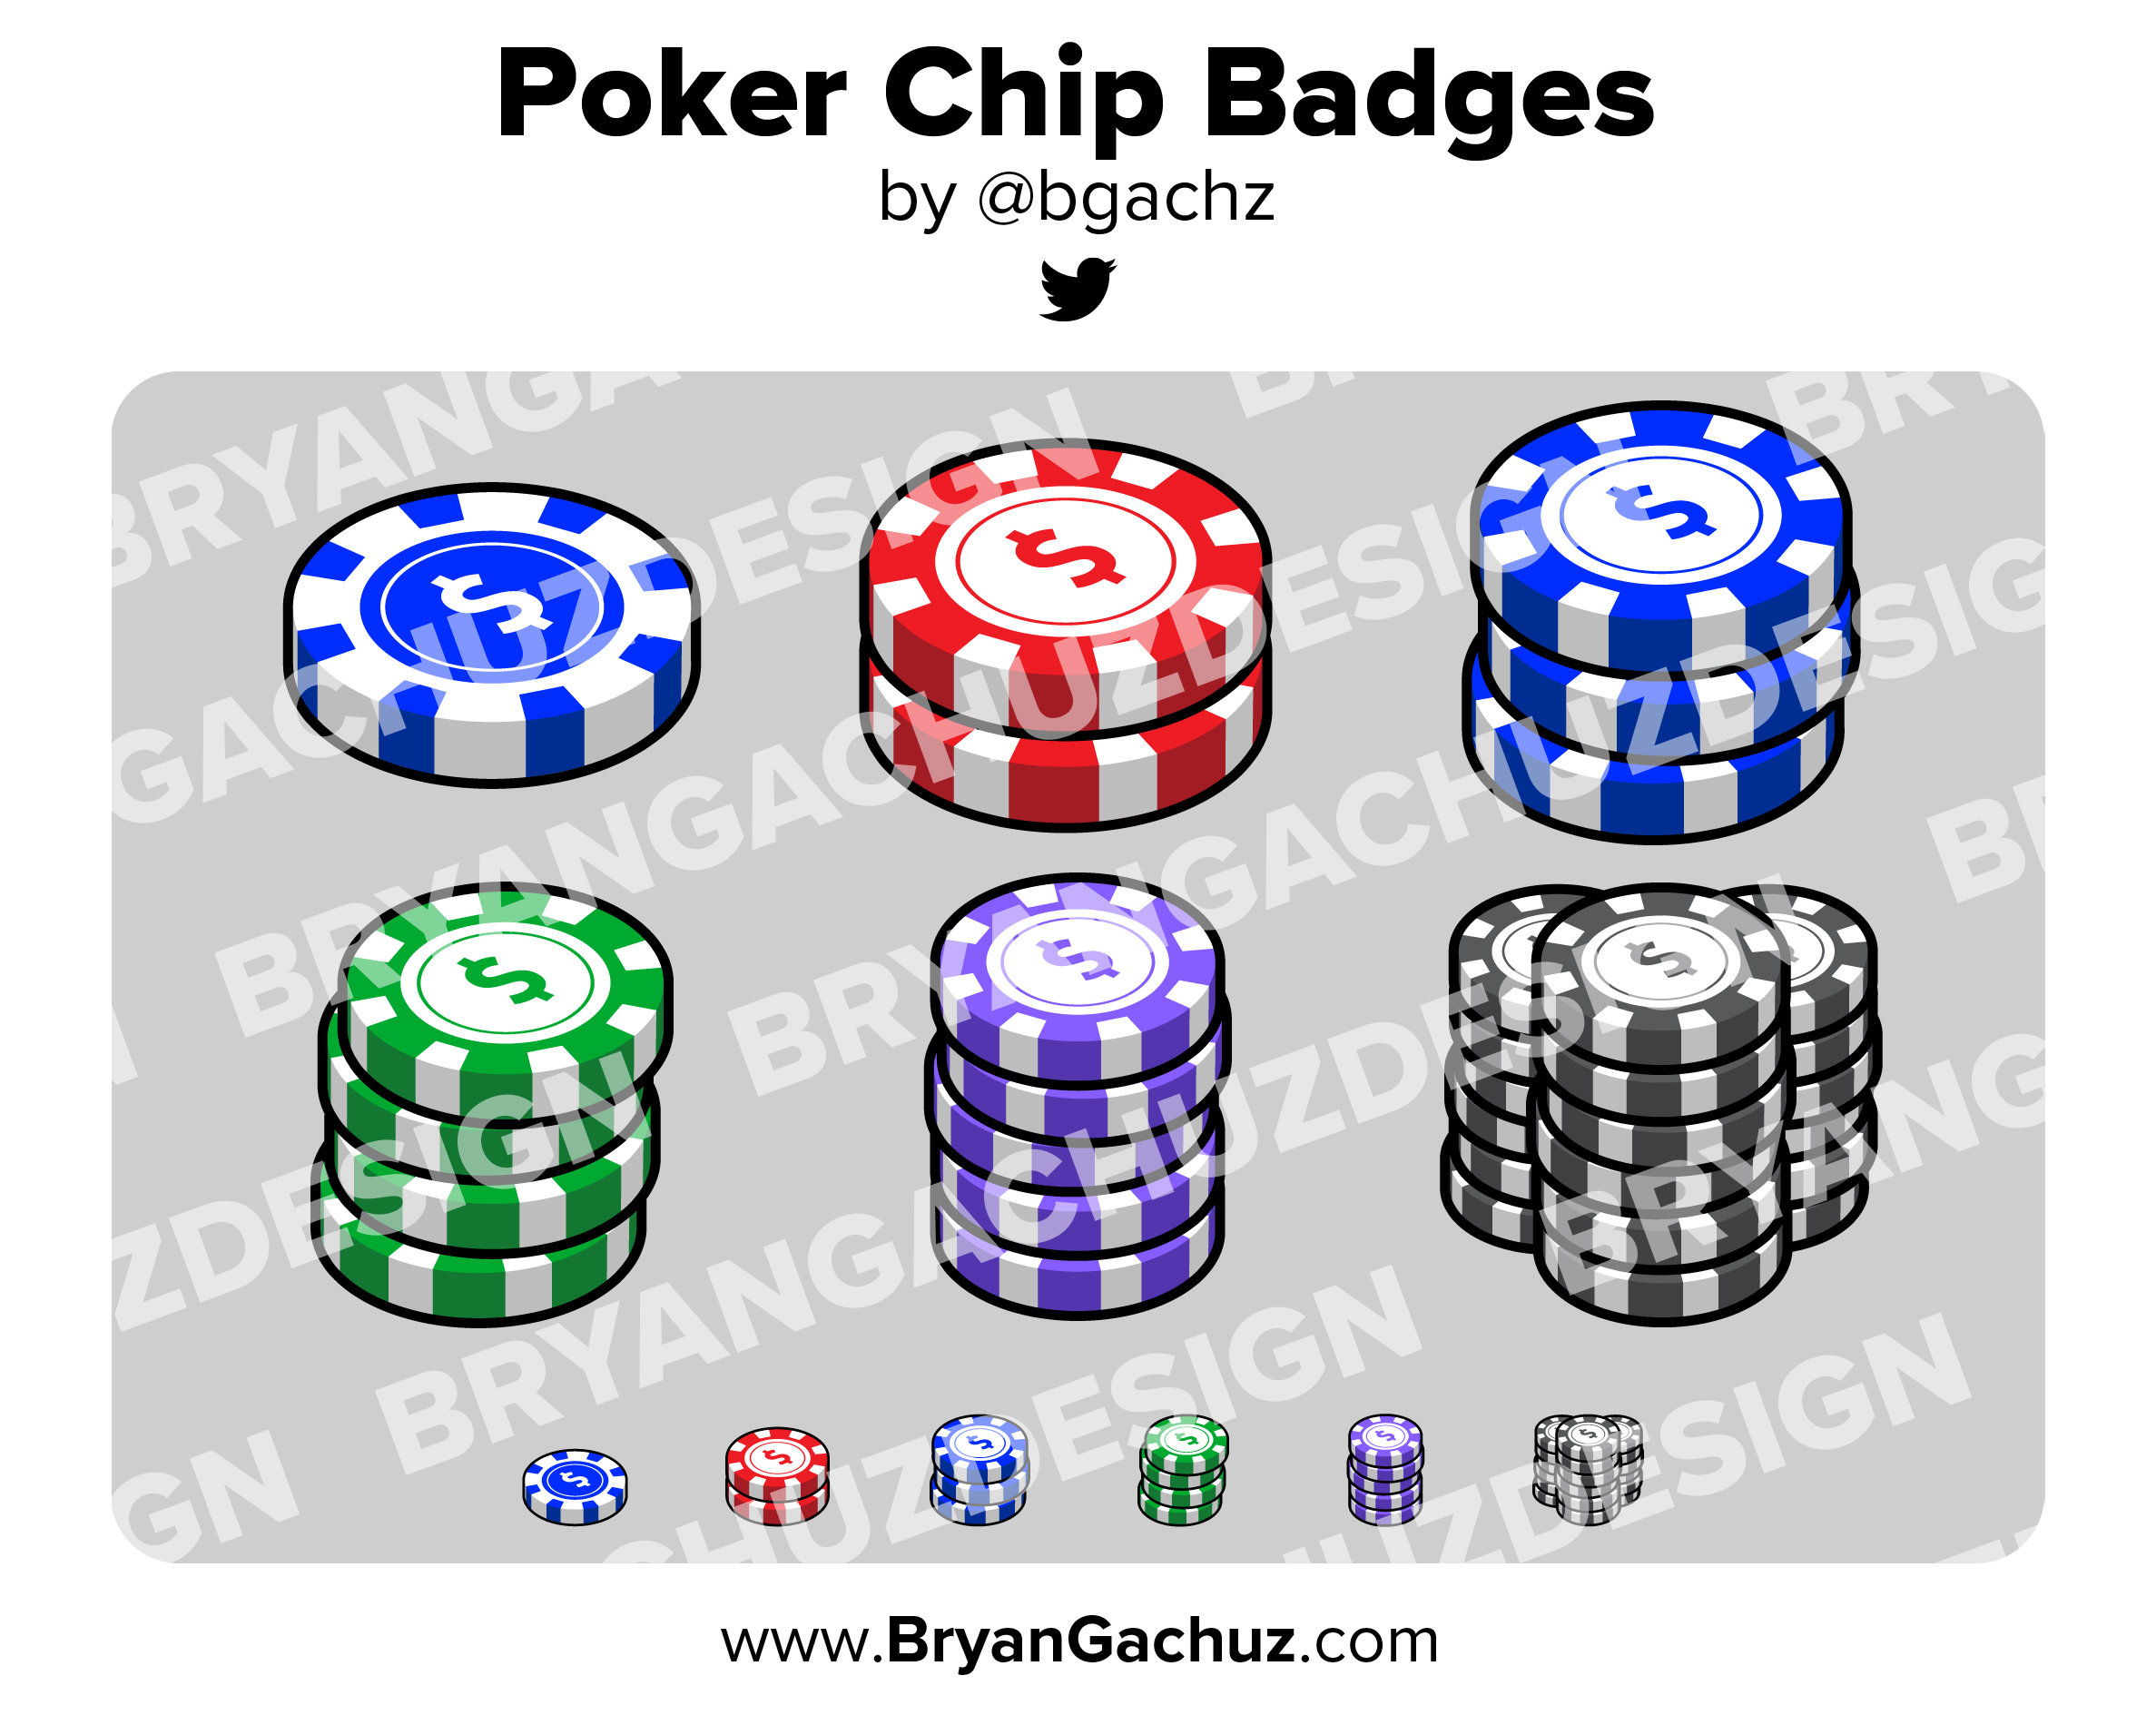 Poker Chip Poker Chips Casino Subscriber Loyalty Bit Badges Channel Points For Twitch Discord Or Youtube